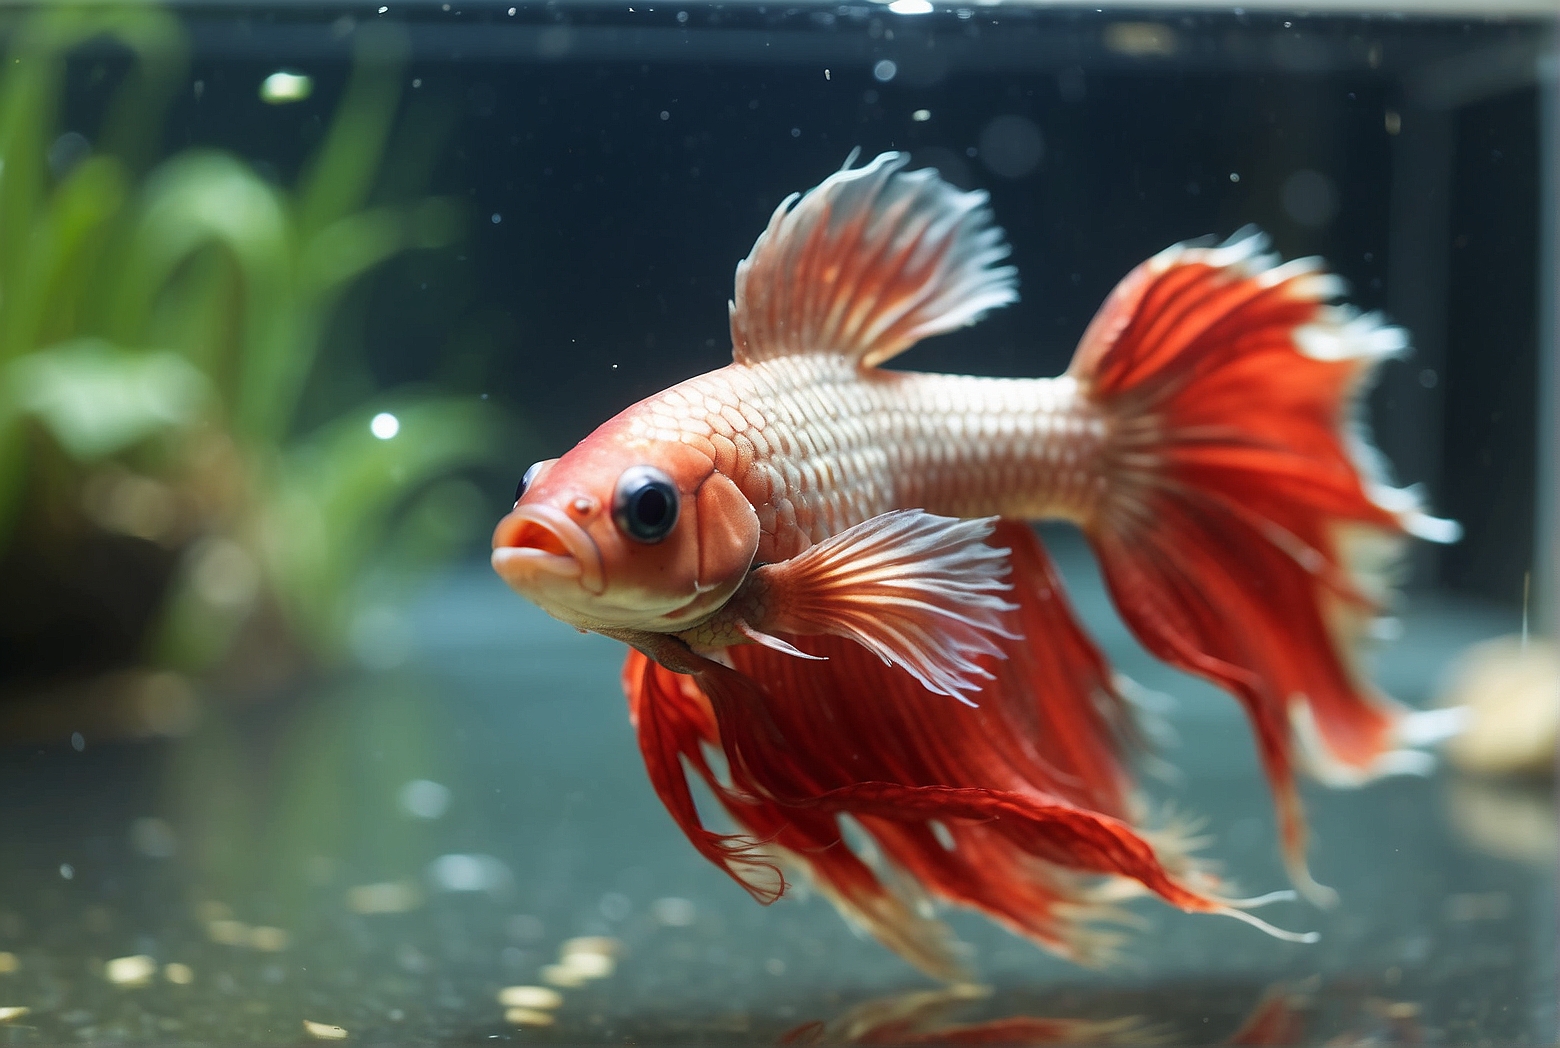 Can Female Betta Fish Be Kept Together?